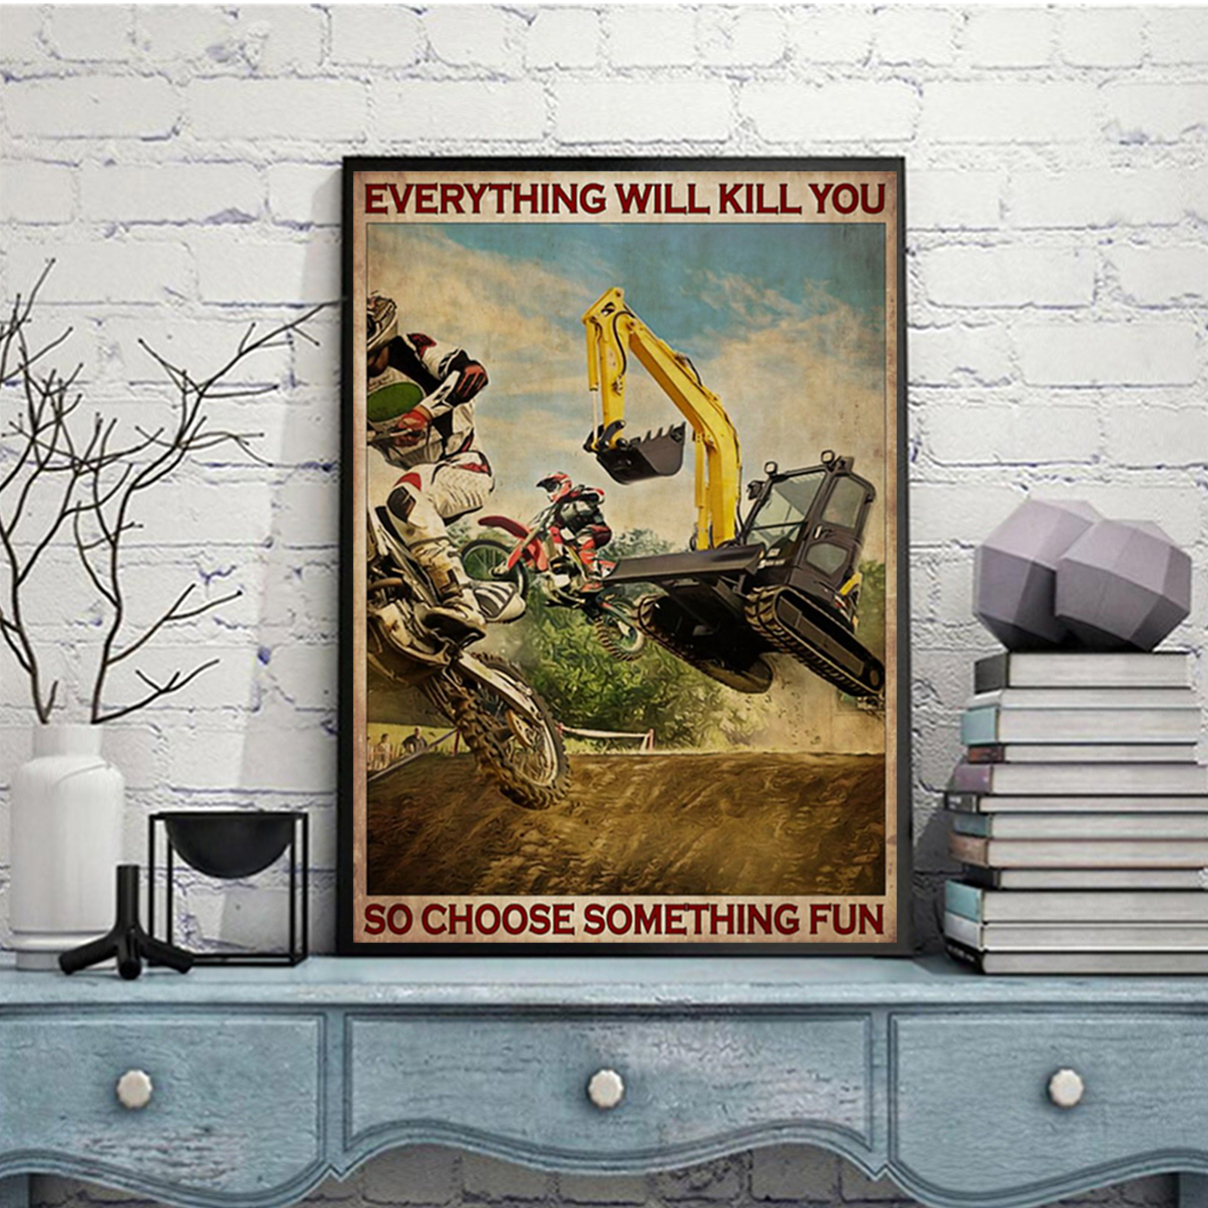 Motorcross and excavator everything will kill you so choose something fun poster A3